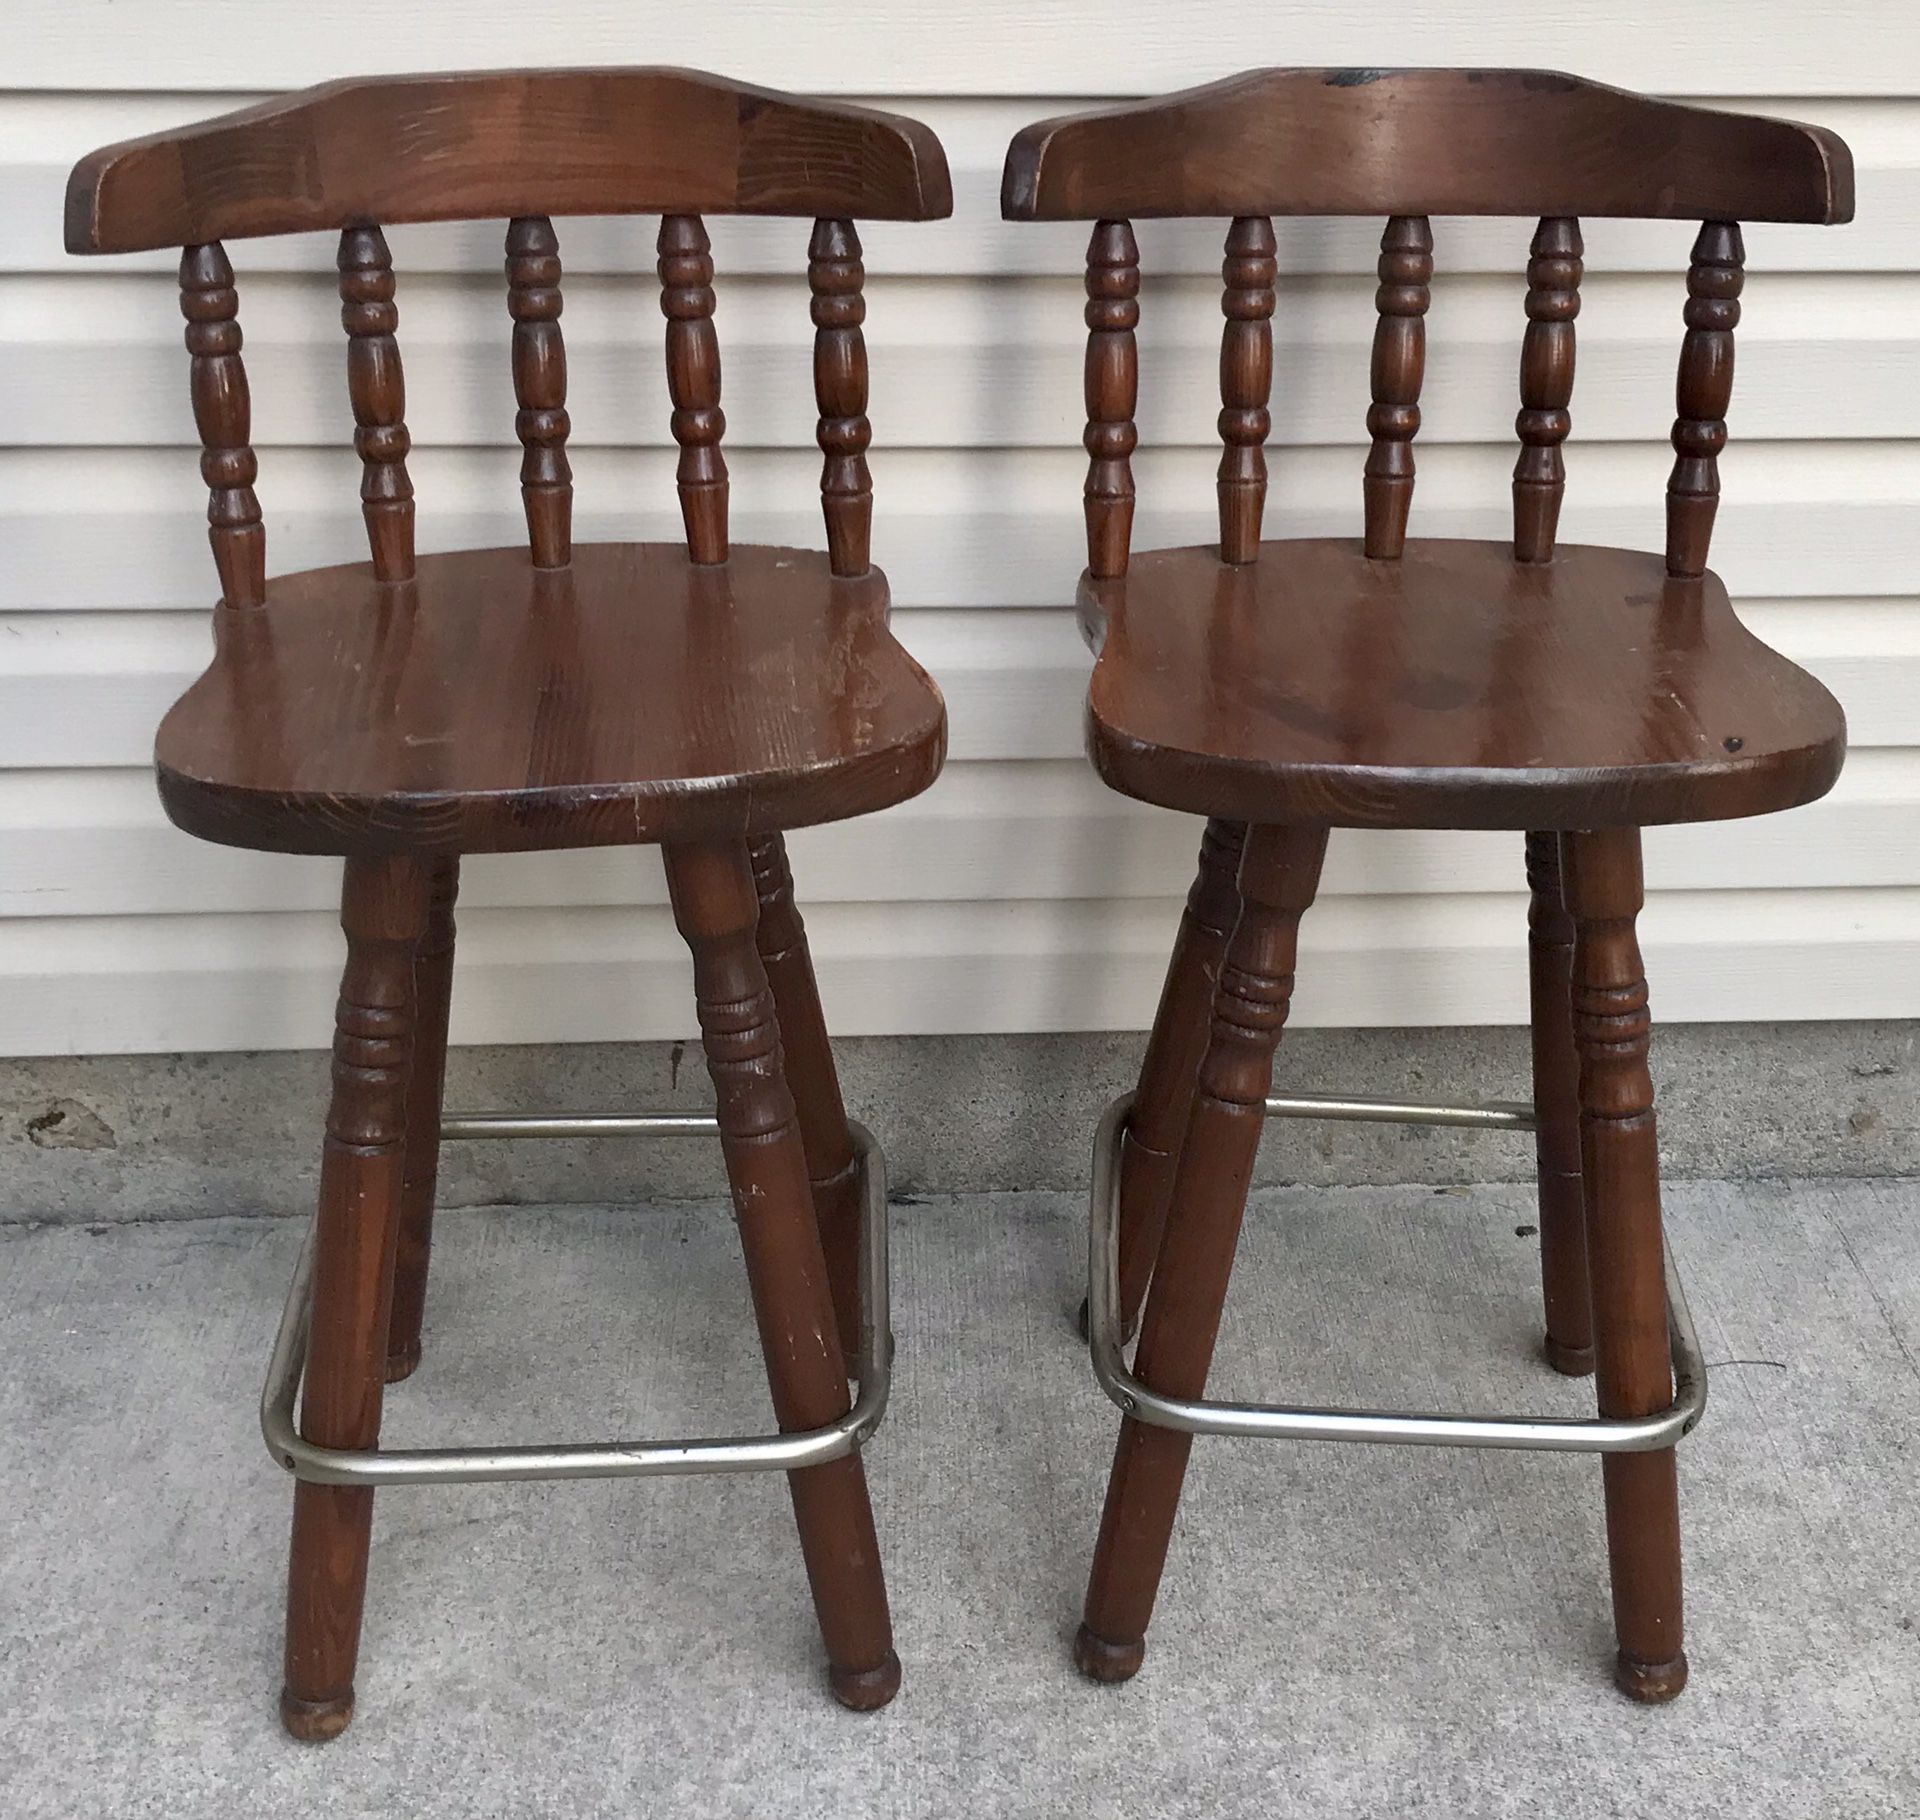 Solid Wood Swivel Bar Stools***Today Only, Both for $30***